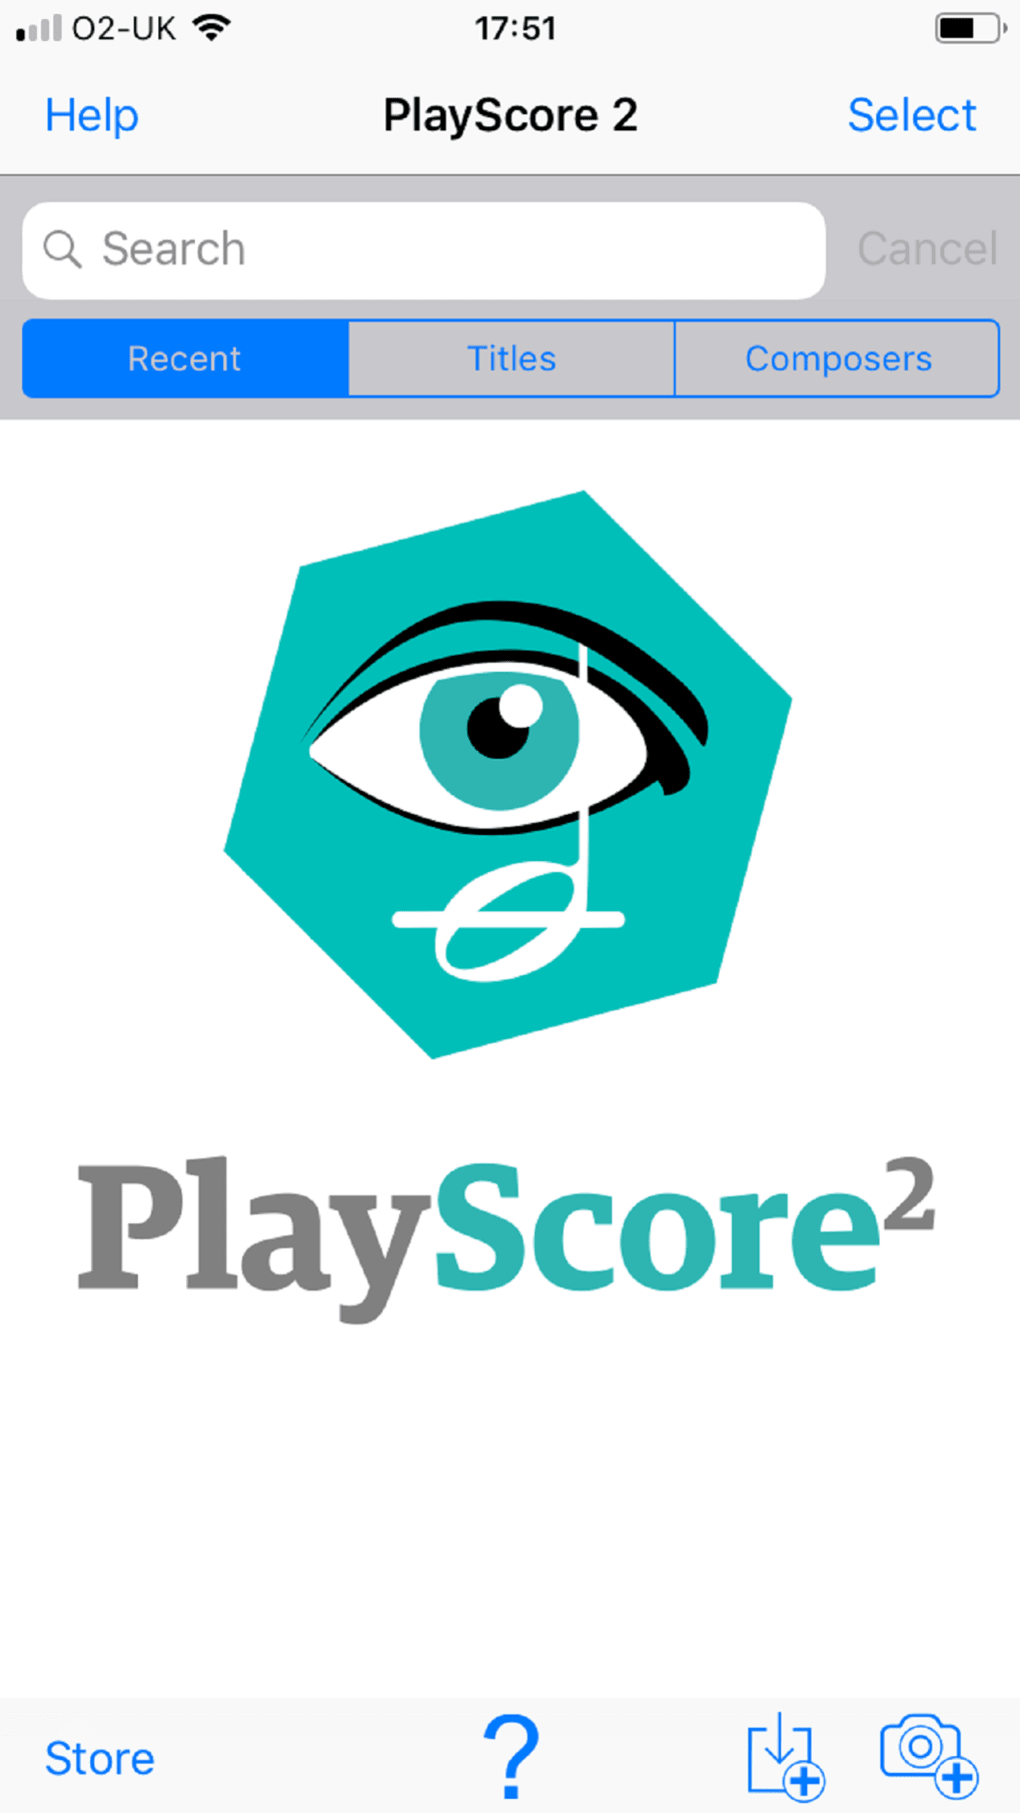 How To Use PlayScore 2